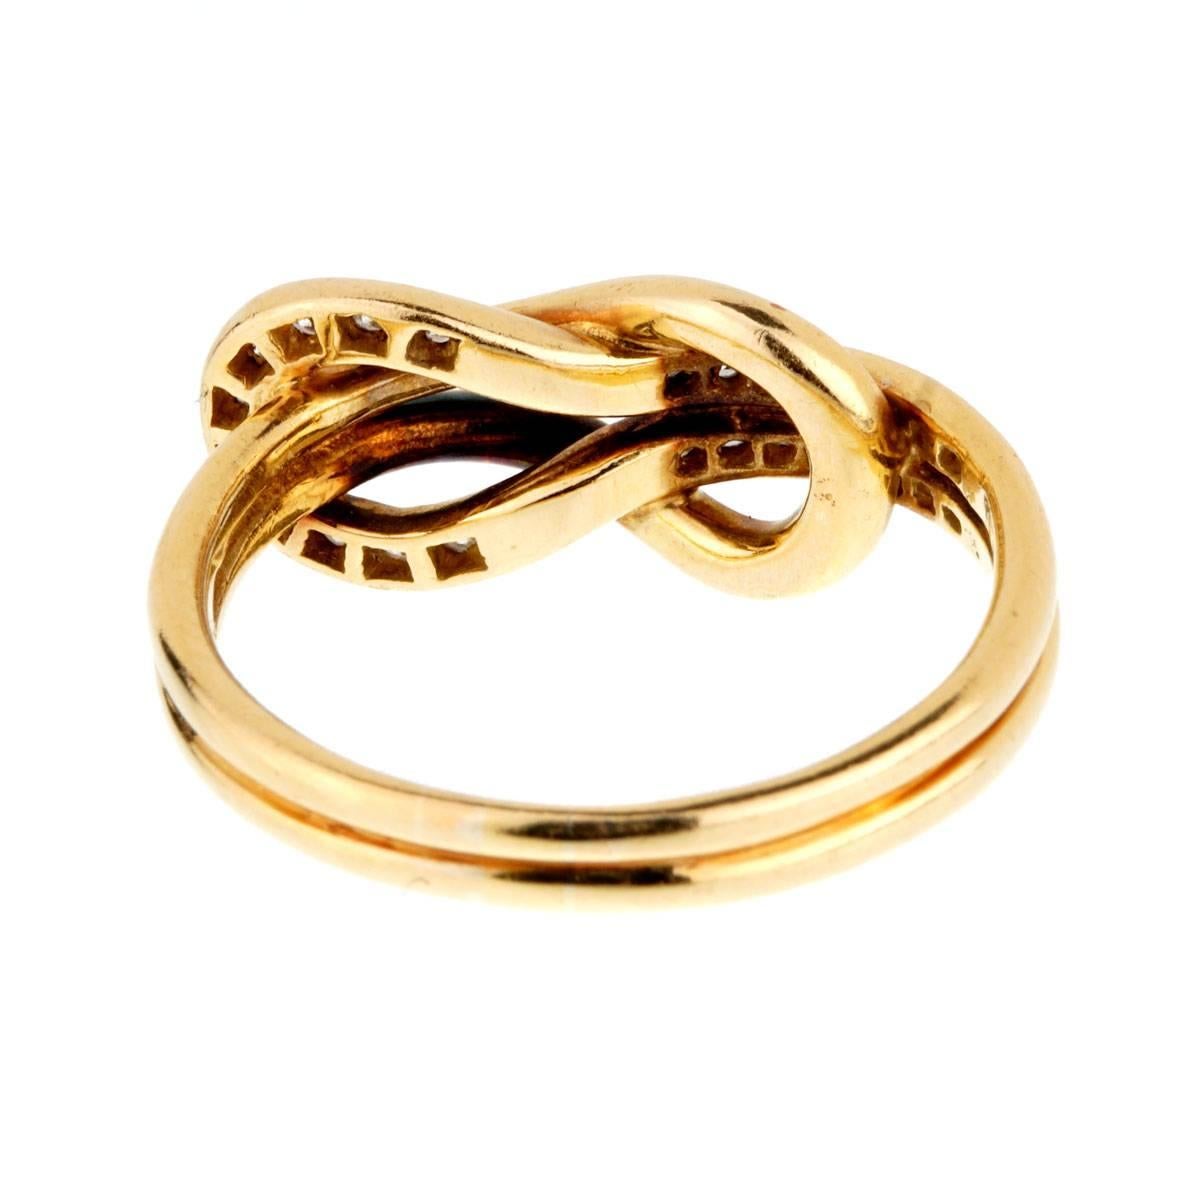 Cartier Diamond Gold Love Knot Ring at 